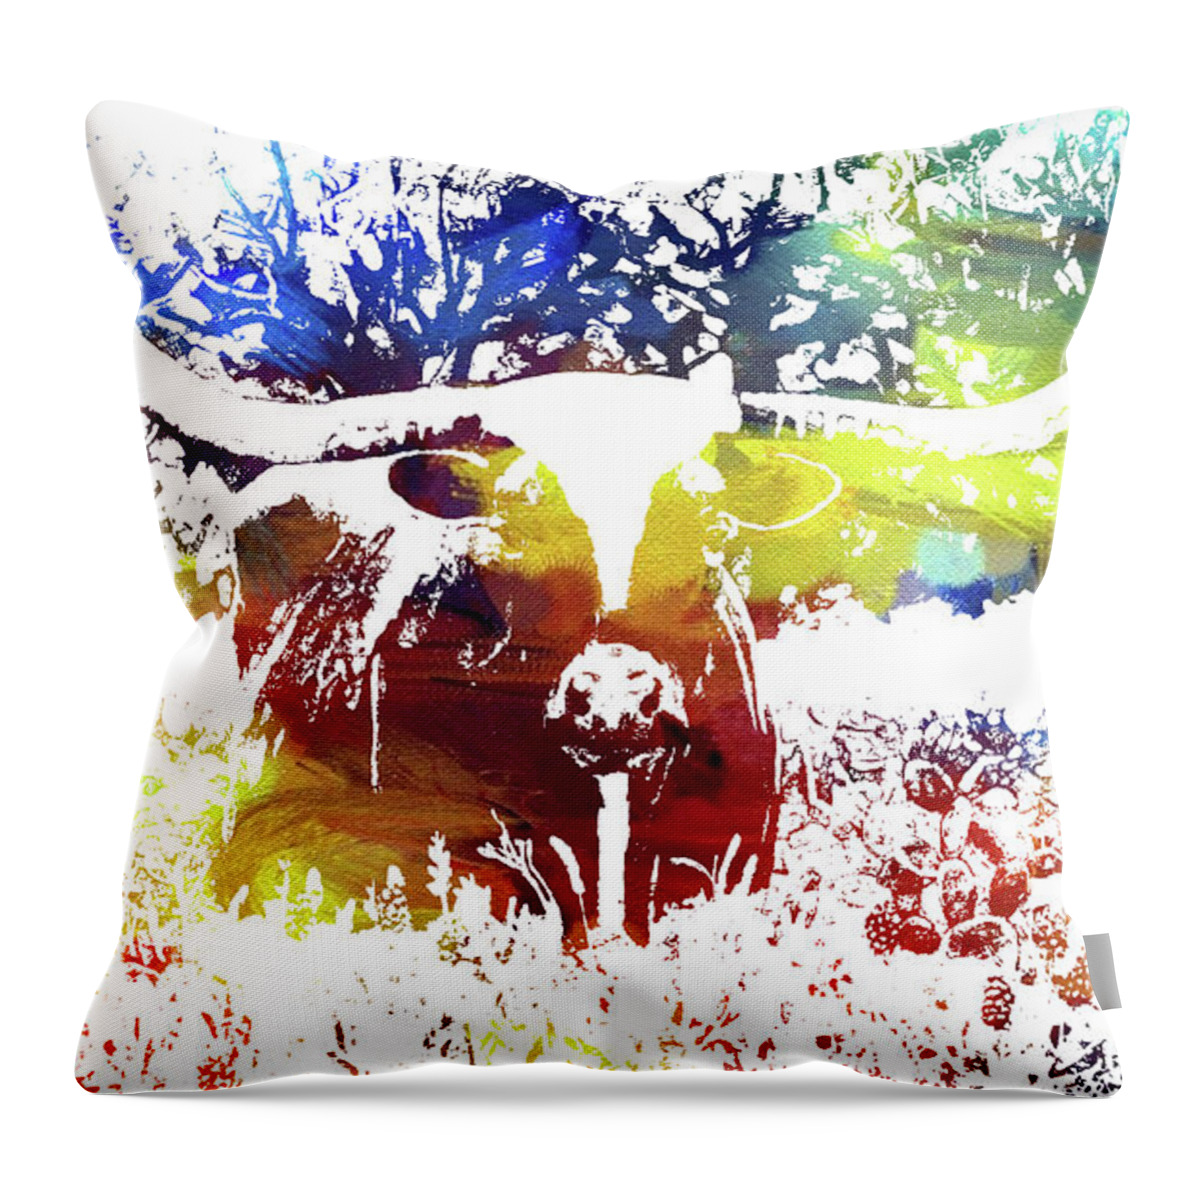 Longhorn Throw Pillow featuring the painting Texas Longhorn Front View - Abstract Colors by Hailey E Herrera